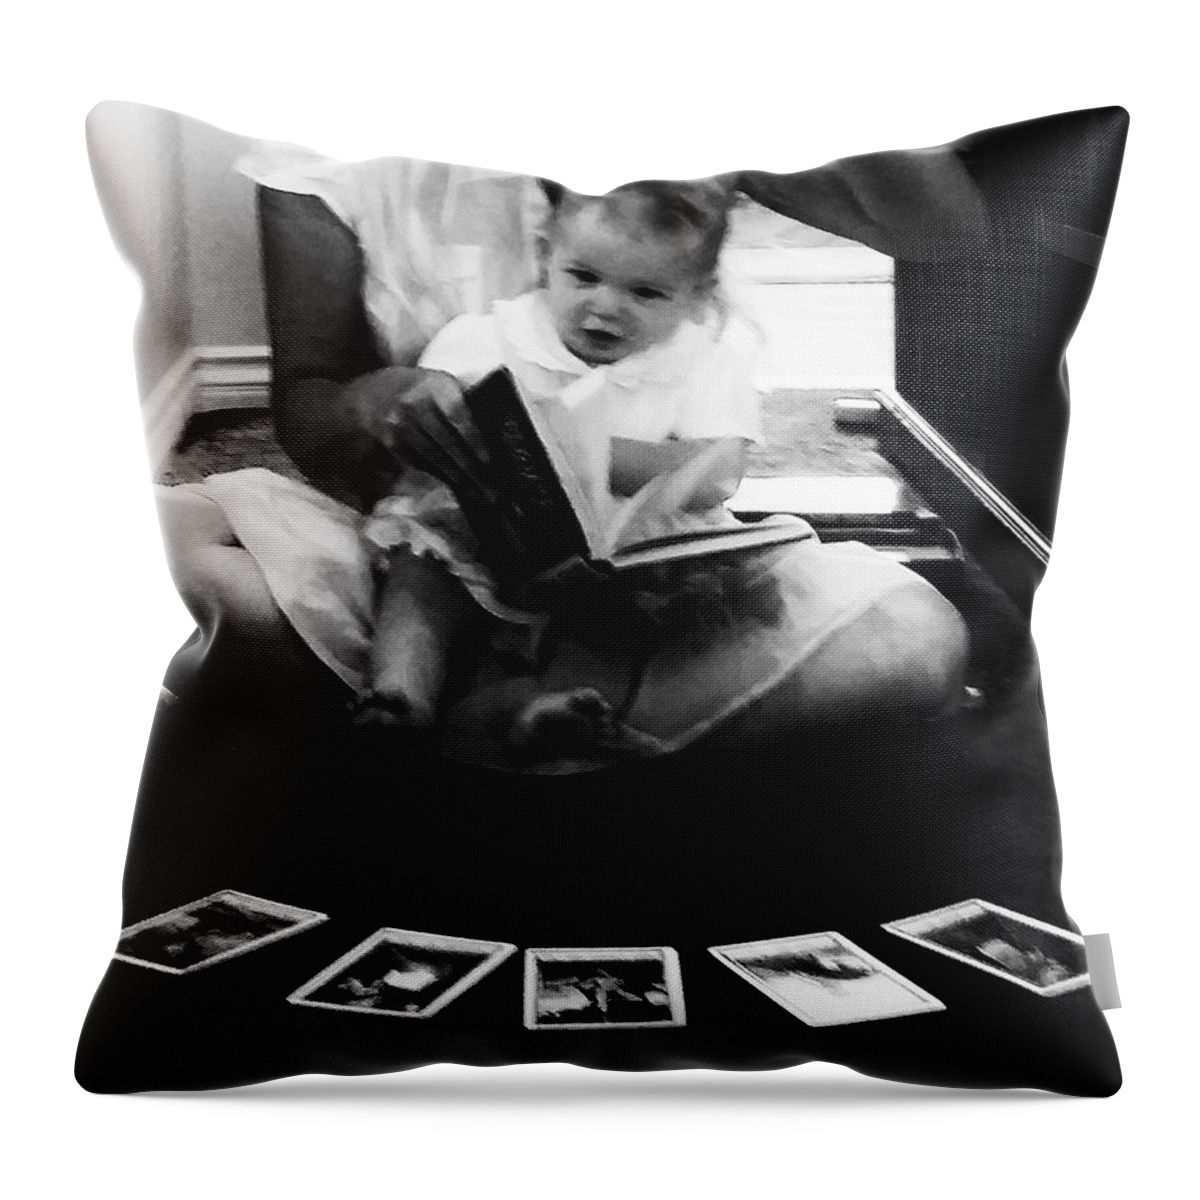 Baby Throw Pillow featuring the photograph Baby Tarot Reader by Diana Haronis